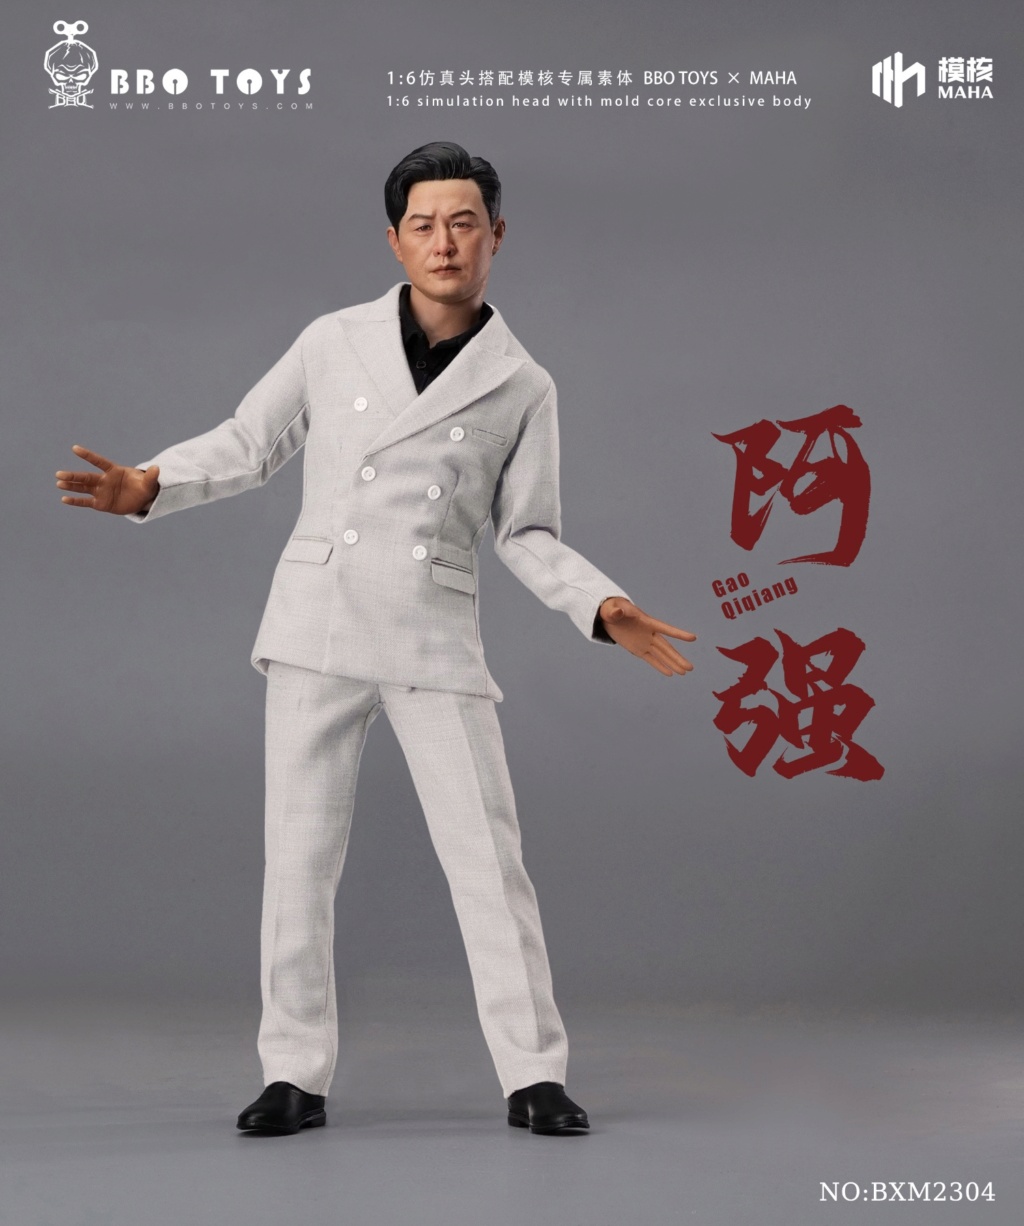 NEW PRODUCT: BBOToys: 1/6 A Qiang 12-inch action figure with suit (new body type) 15304410